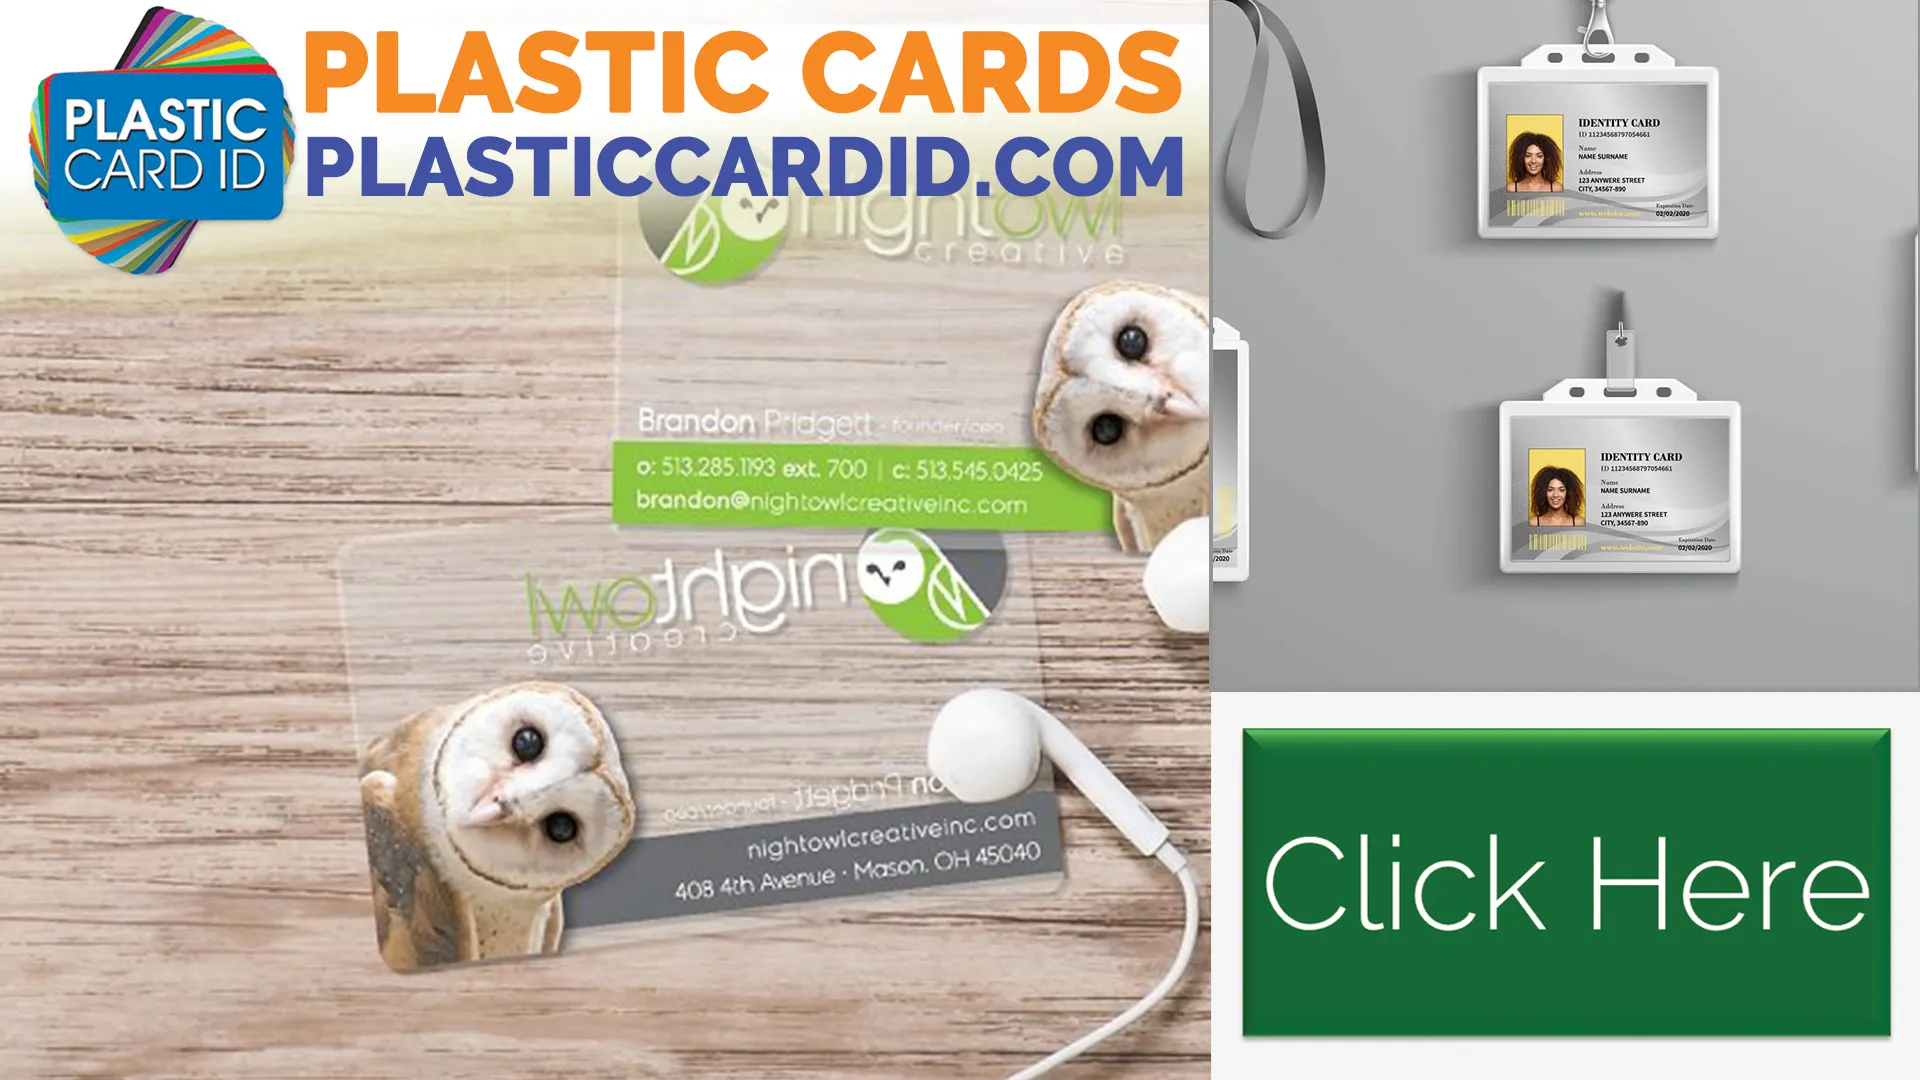 Flexible and Diverse Plastic Card Options